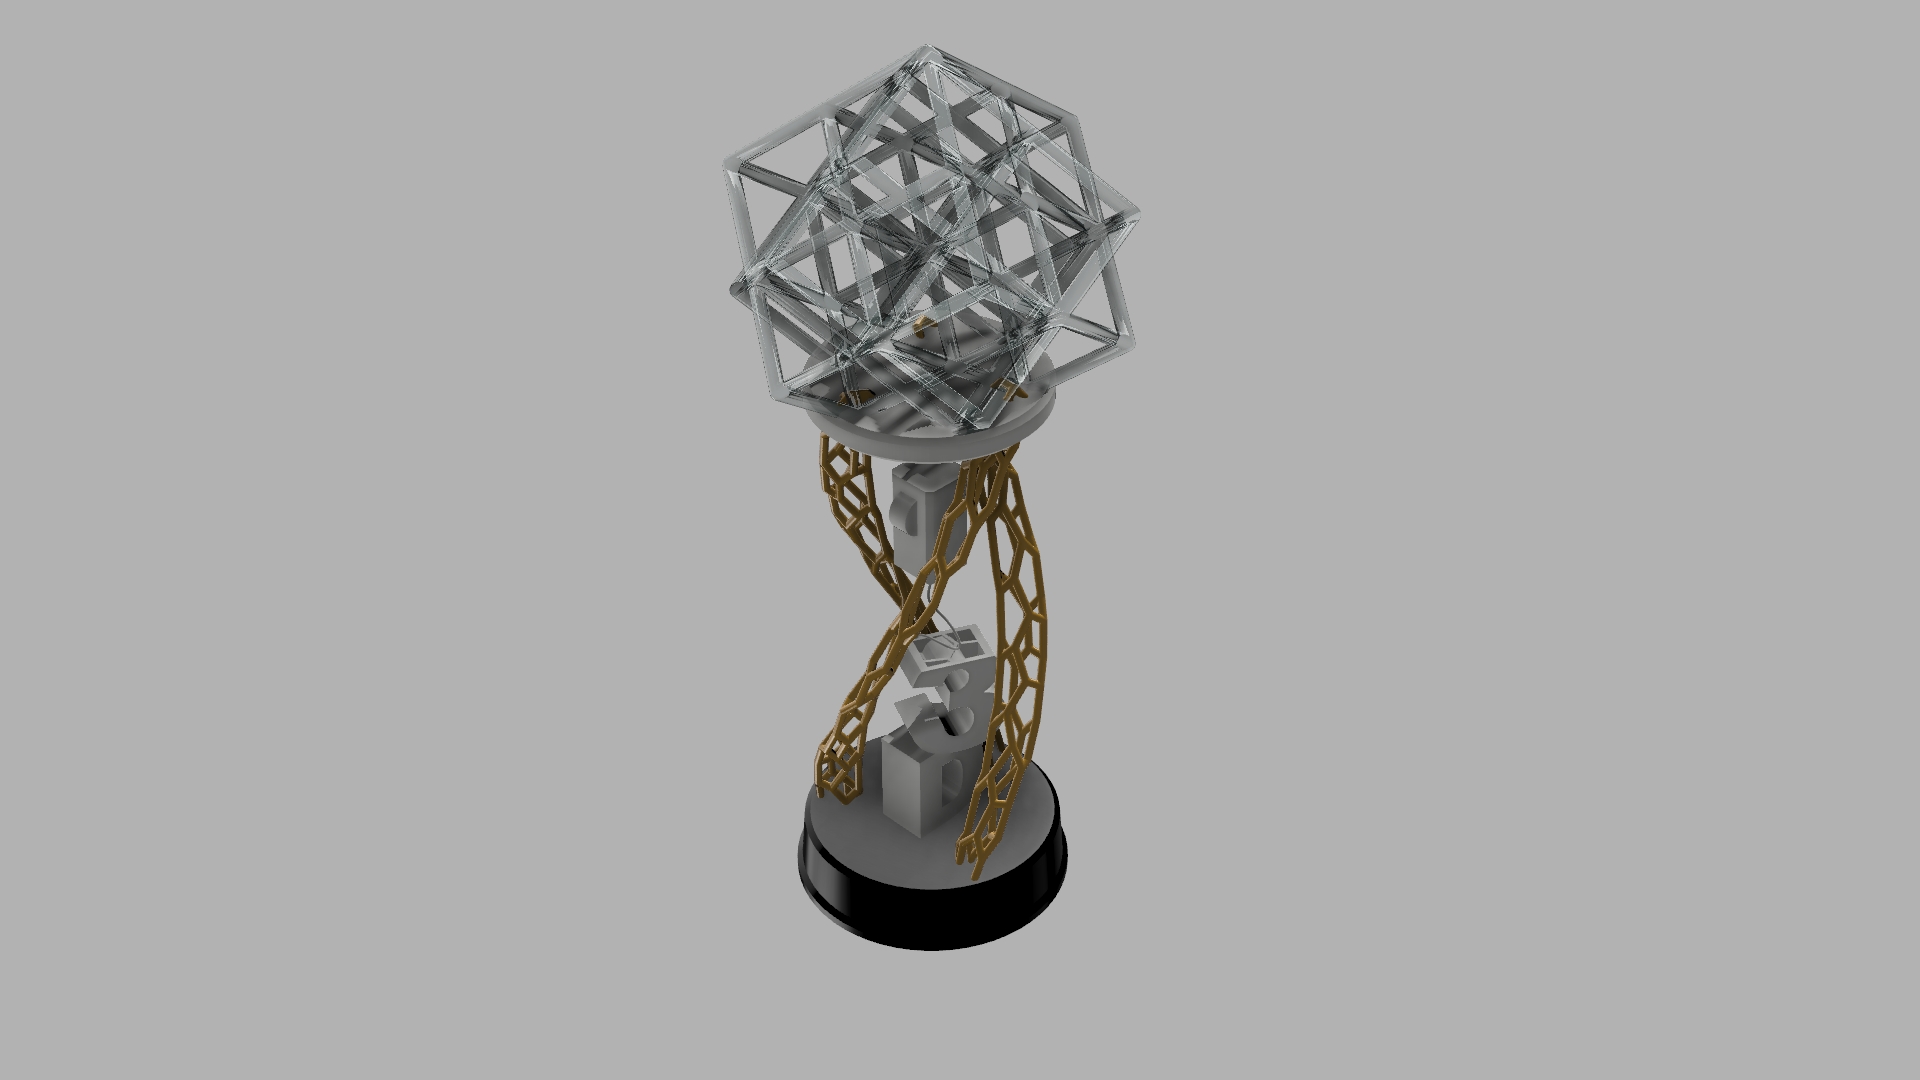 3D Printing Industry Awards 2018 Trophy